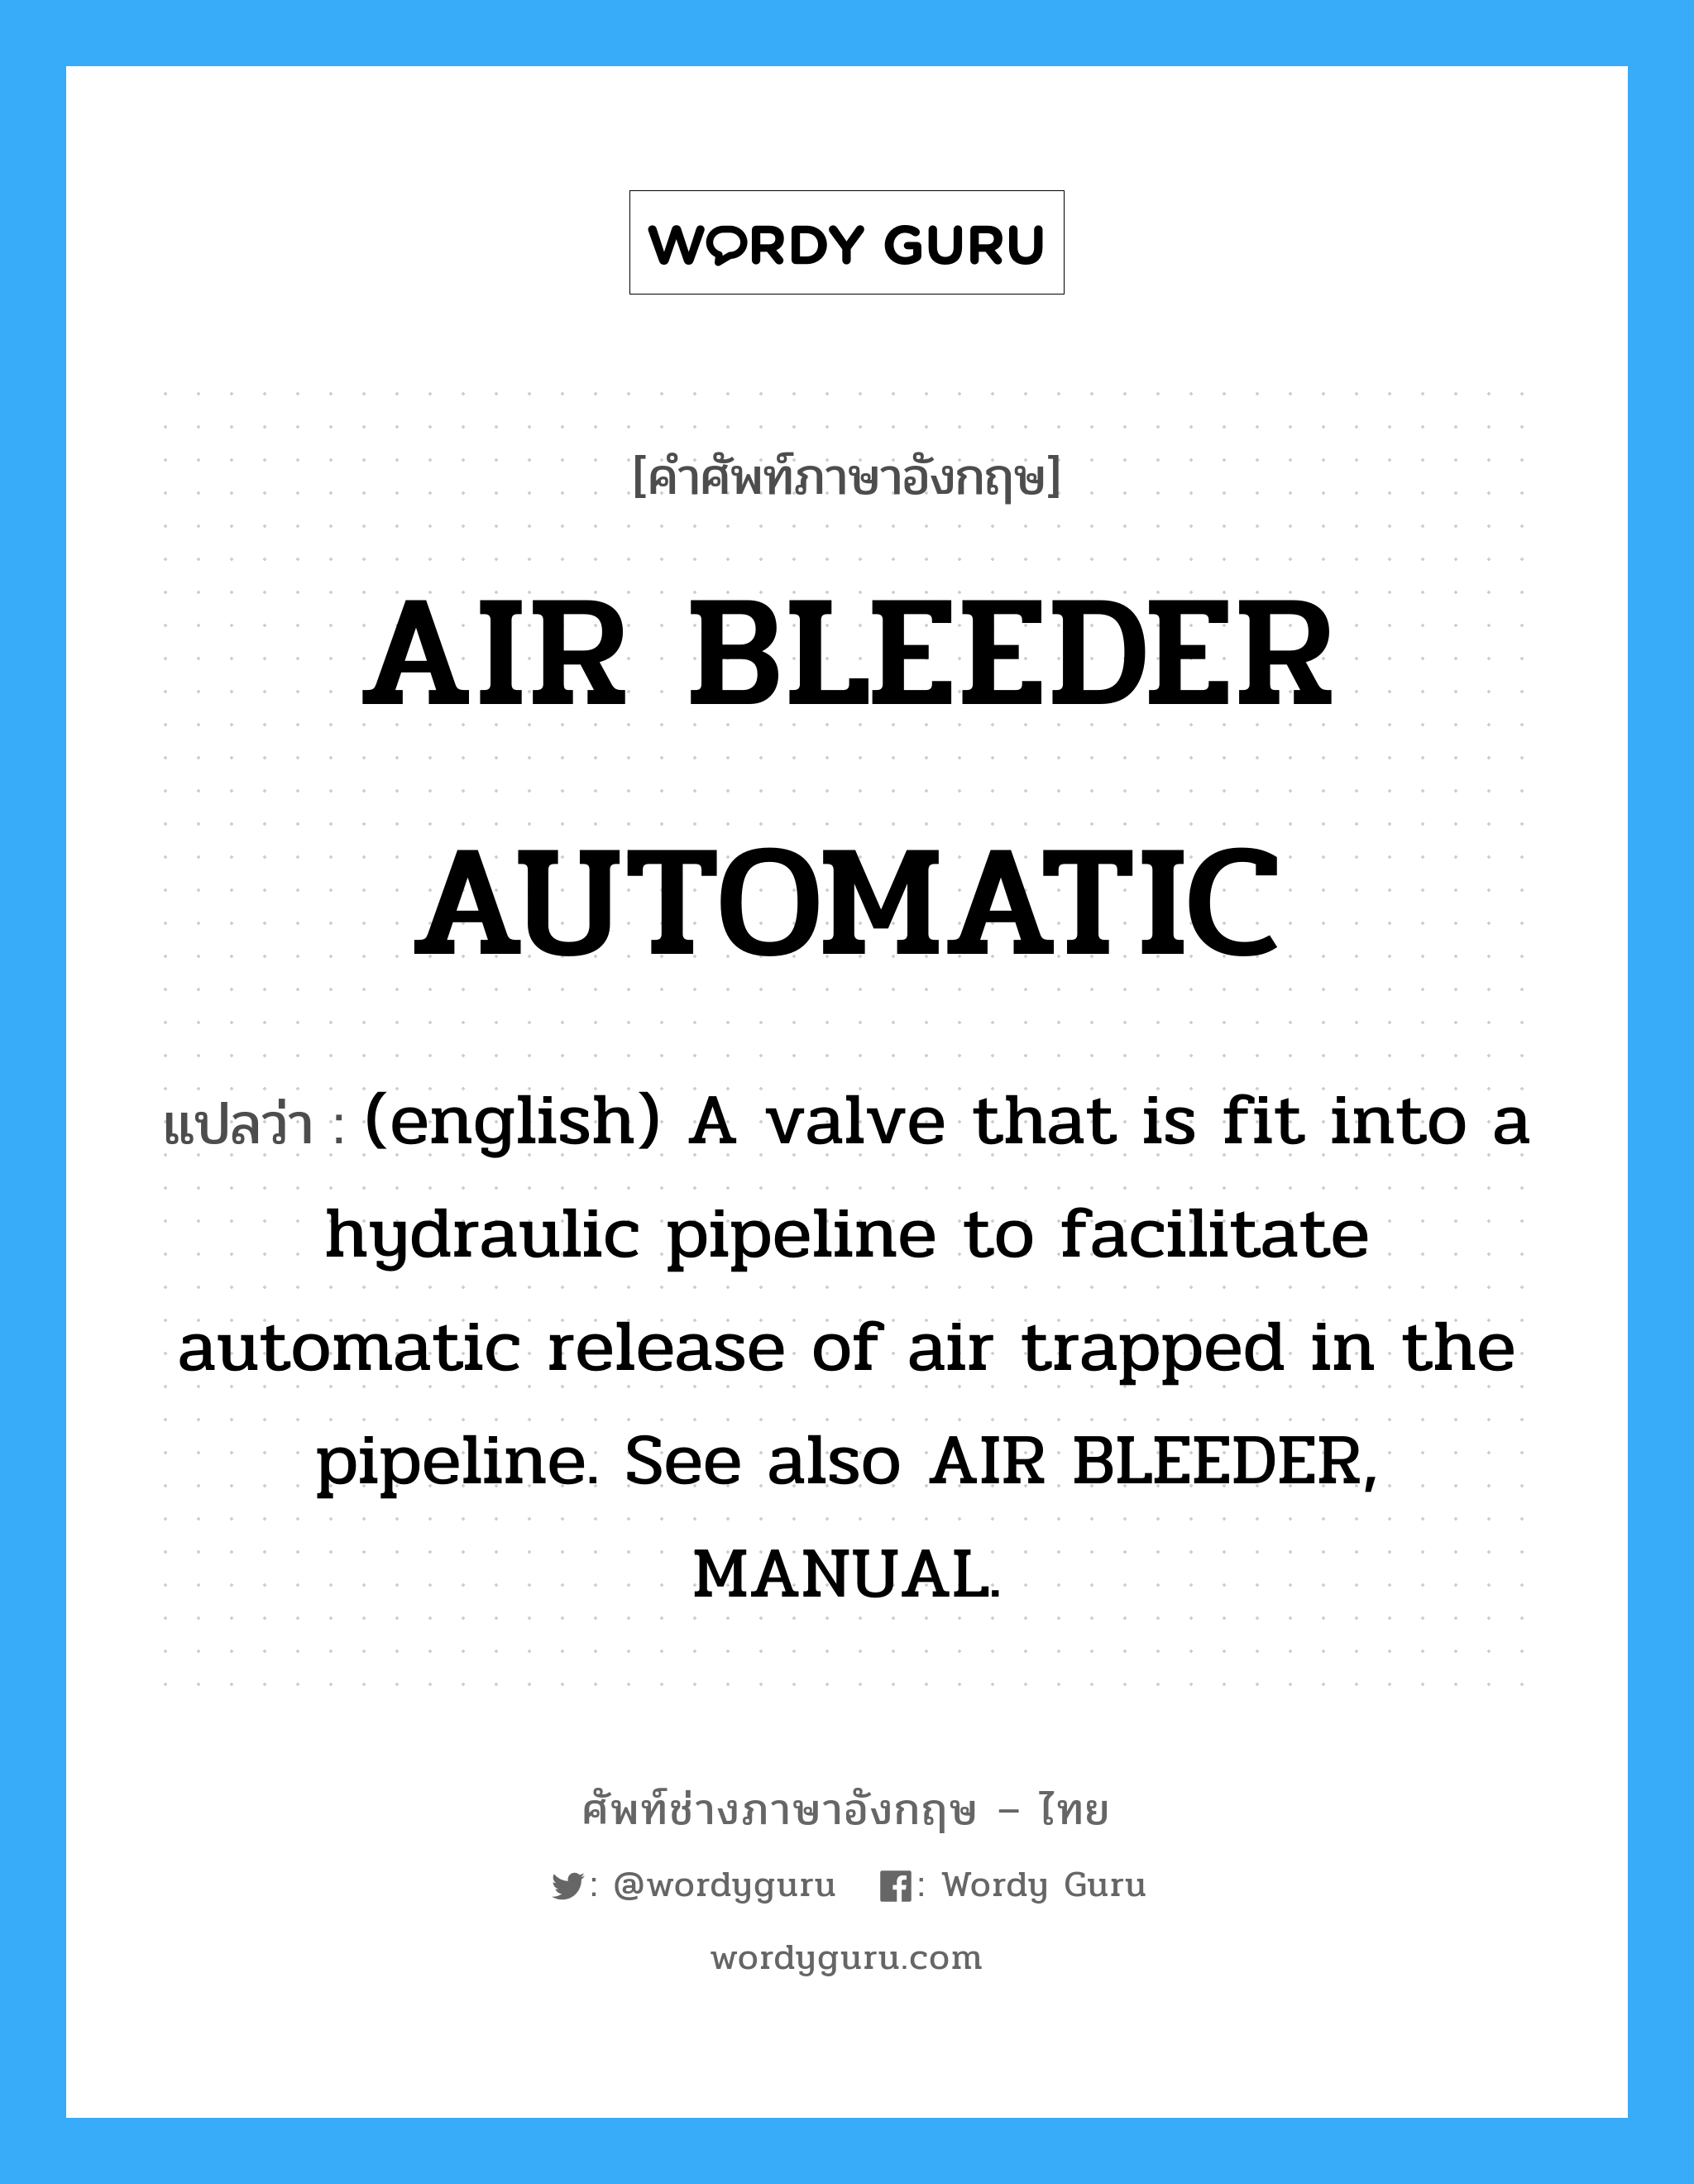 (english) A valve that is fit into a hydraulic pipeline to facilitate automatic release of air trapped in the pipeline. See also AIR BLEEDER, MANUAL. ภาษาอังกฤษ?, คำศัพท์ช่างภาษาอังกฤษ - ไทย (english) A valve that is fit into a hydraulic pipeline to facilitate automatic release of air trapped in the pipeline. See also AIR BLEEDER, MANUAL. คำศัพท์ภาษาอังกฤษ (english) A valve that is fit into a hydraulic pipeline to facilitate automatic release of air trapped in the pipeline. See also AIR BLEEDER, MANUAL. แปลว่า AIR BLEEDER AUTOMATIC